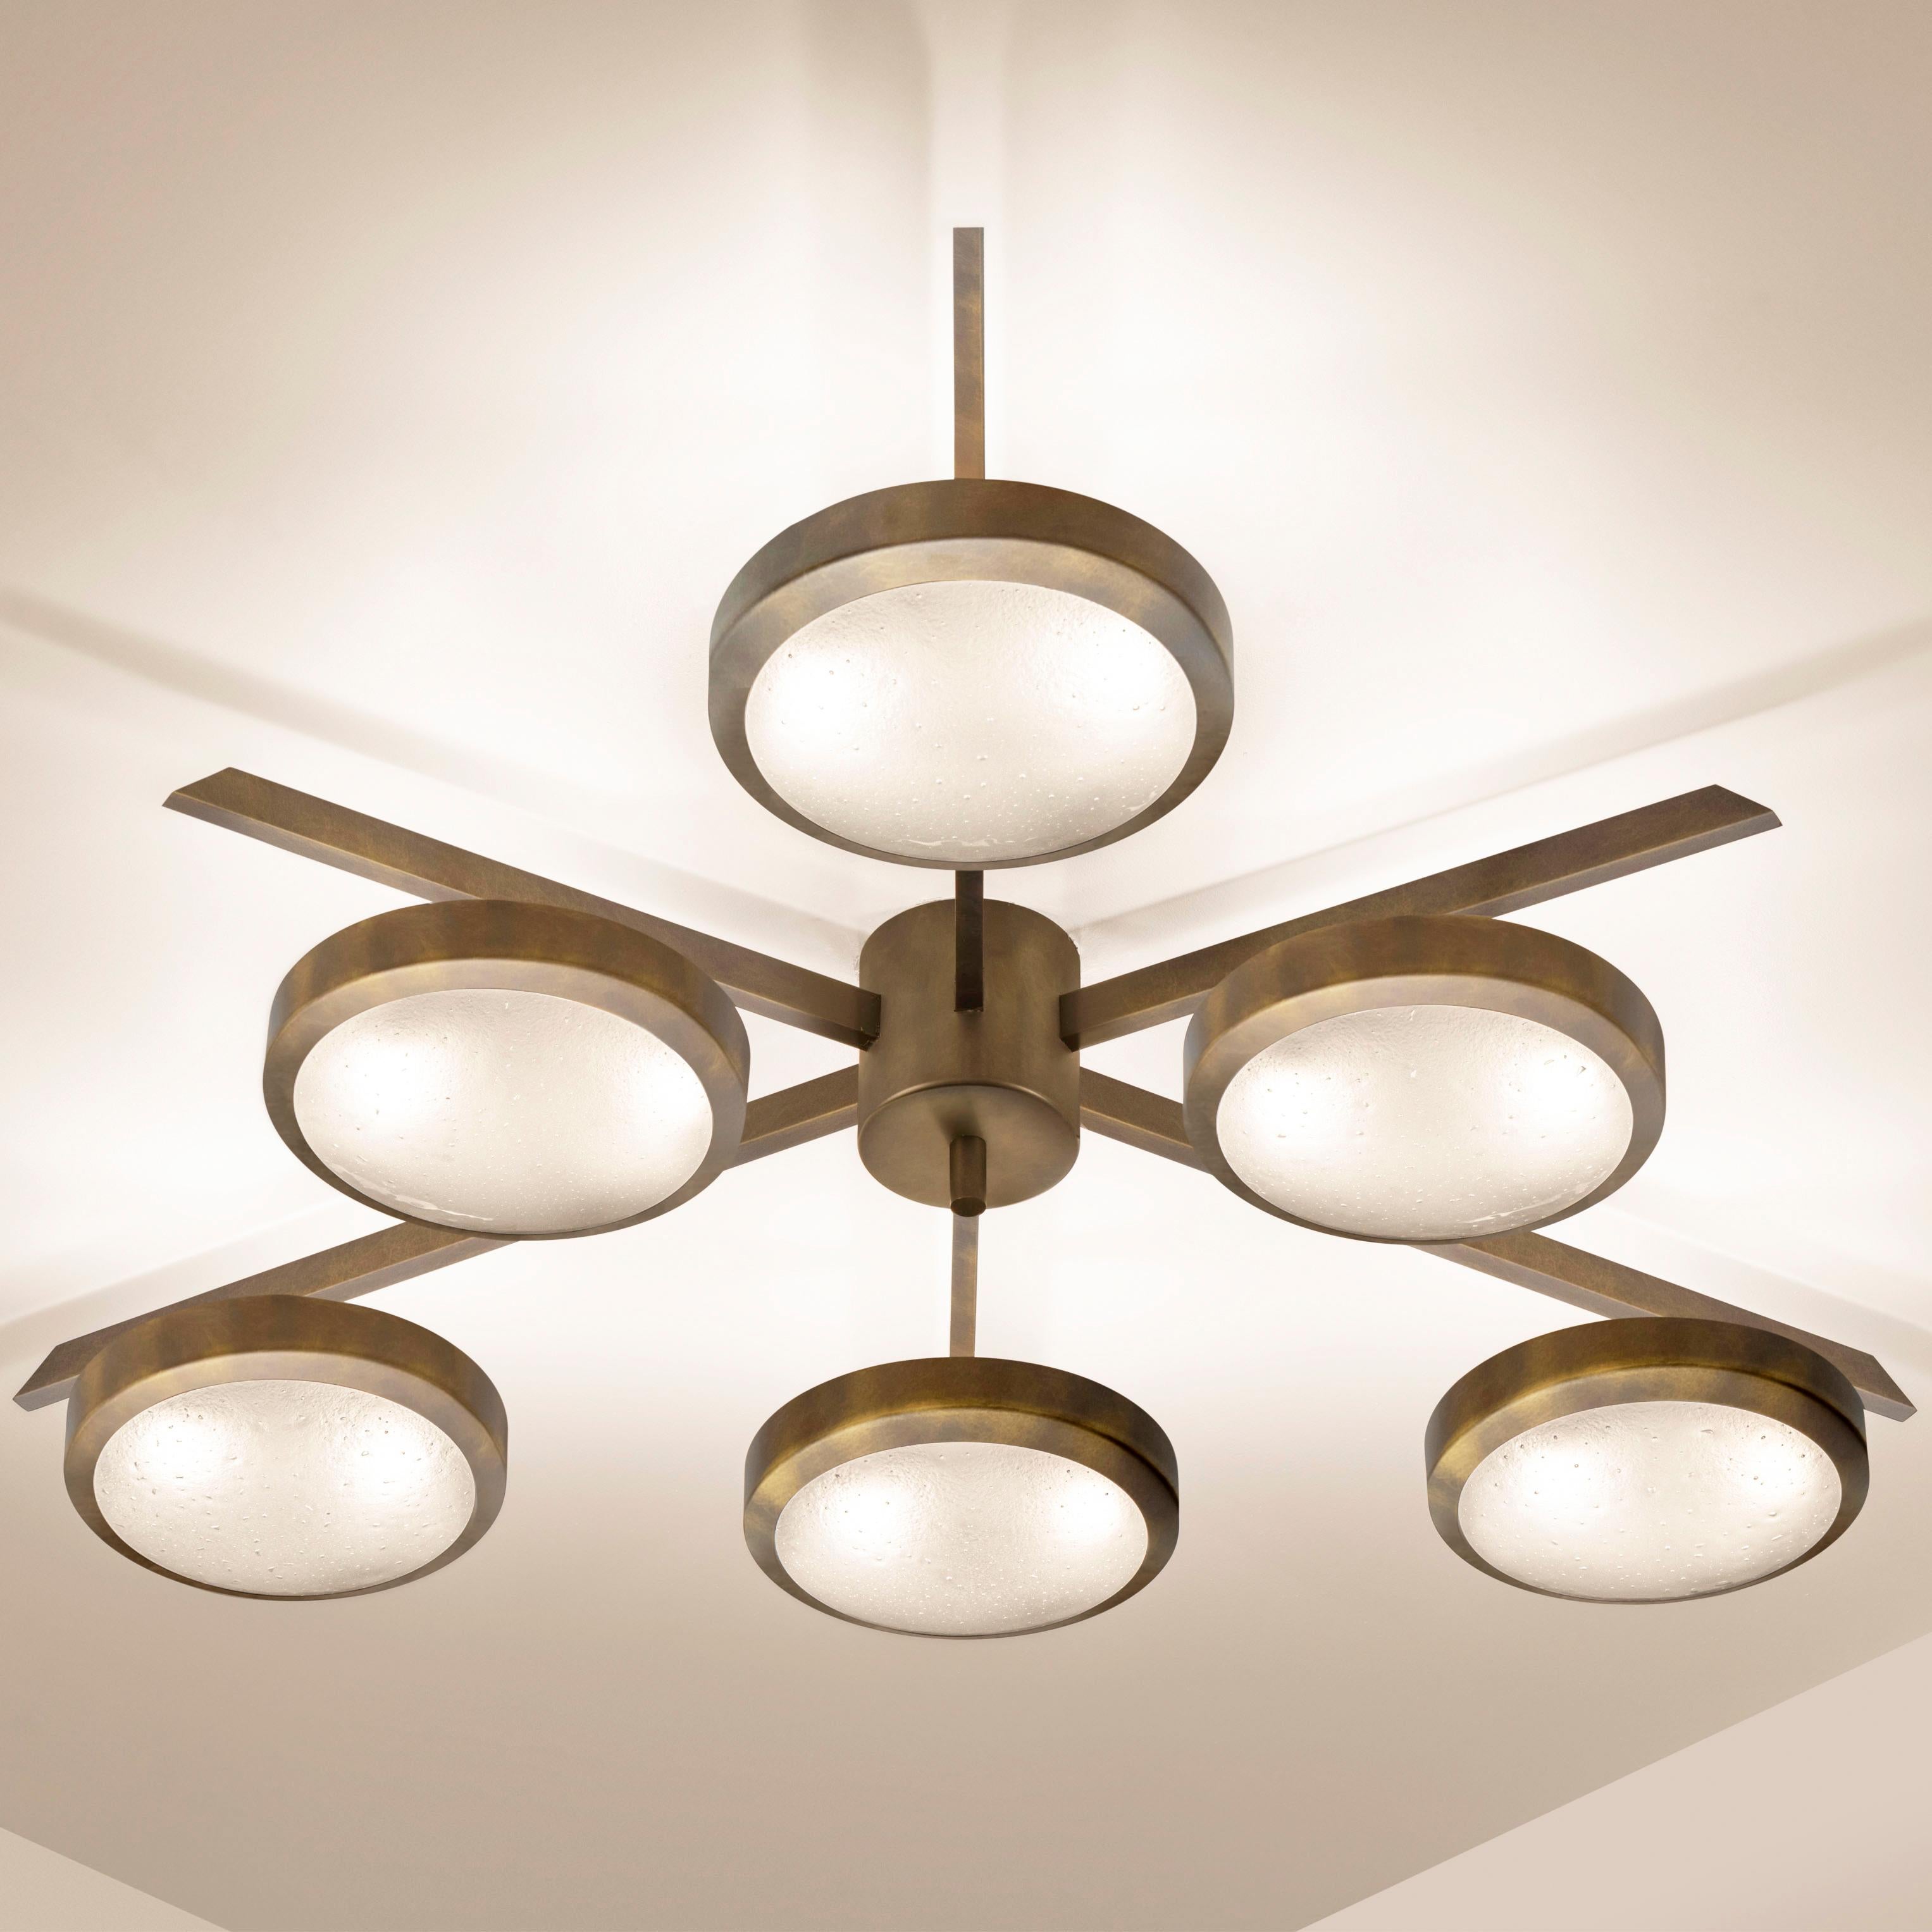 Sei Ceiling Light by Gaspare Asaro - Polished Nickel Finish In New Condition For Sale In New York, NY